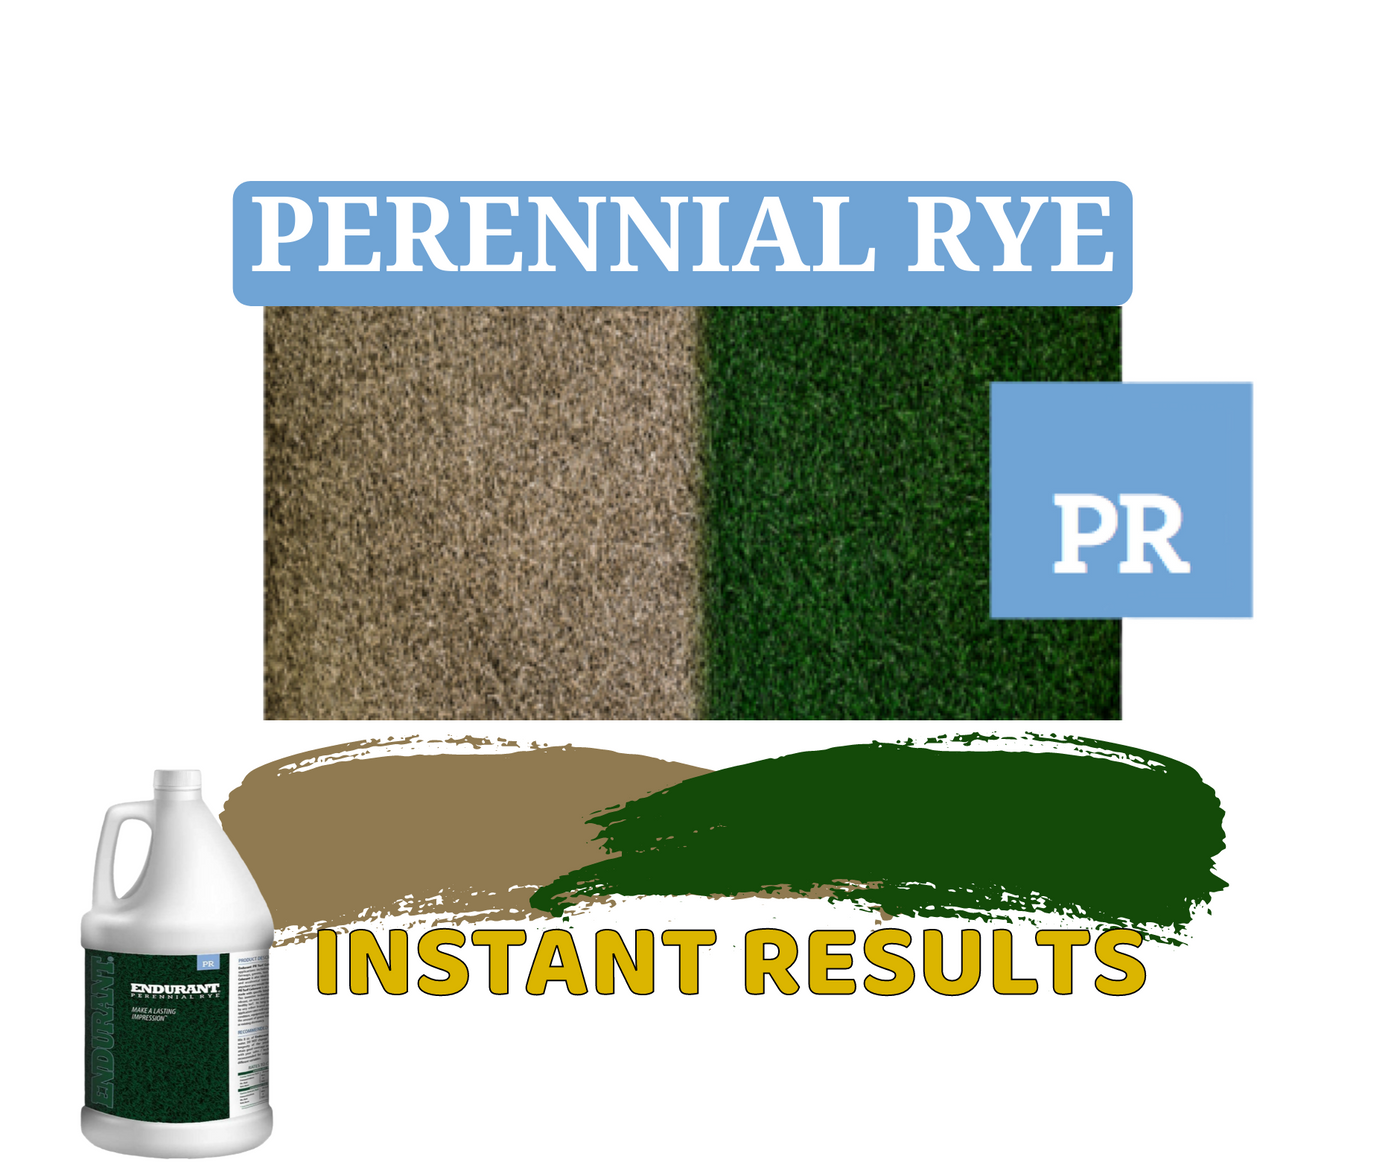 Endurant Perennial Rye - The best non toxic lawn paint for your grass